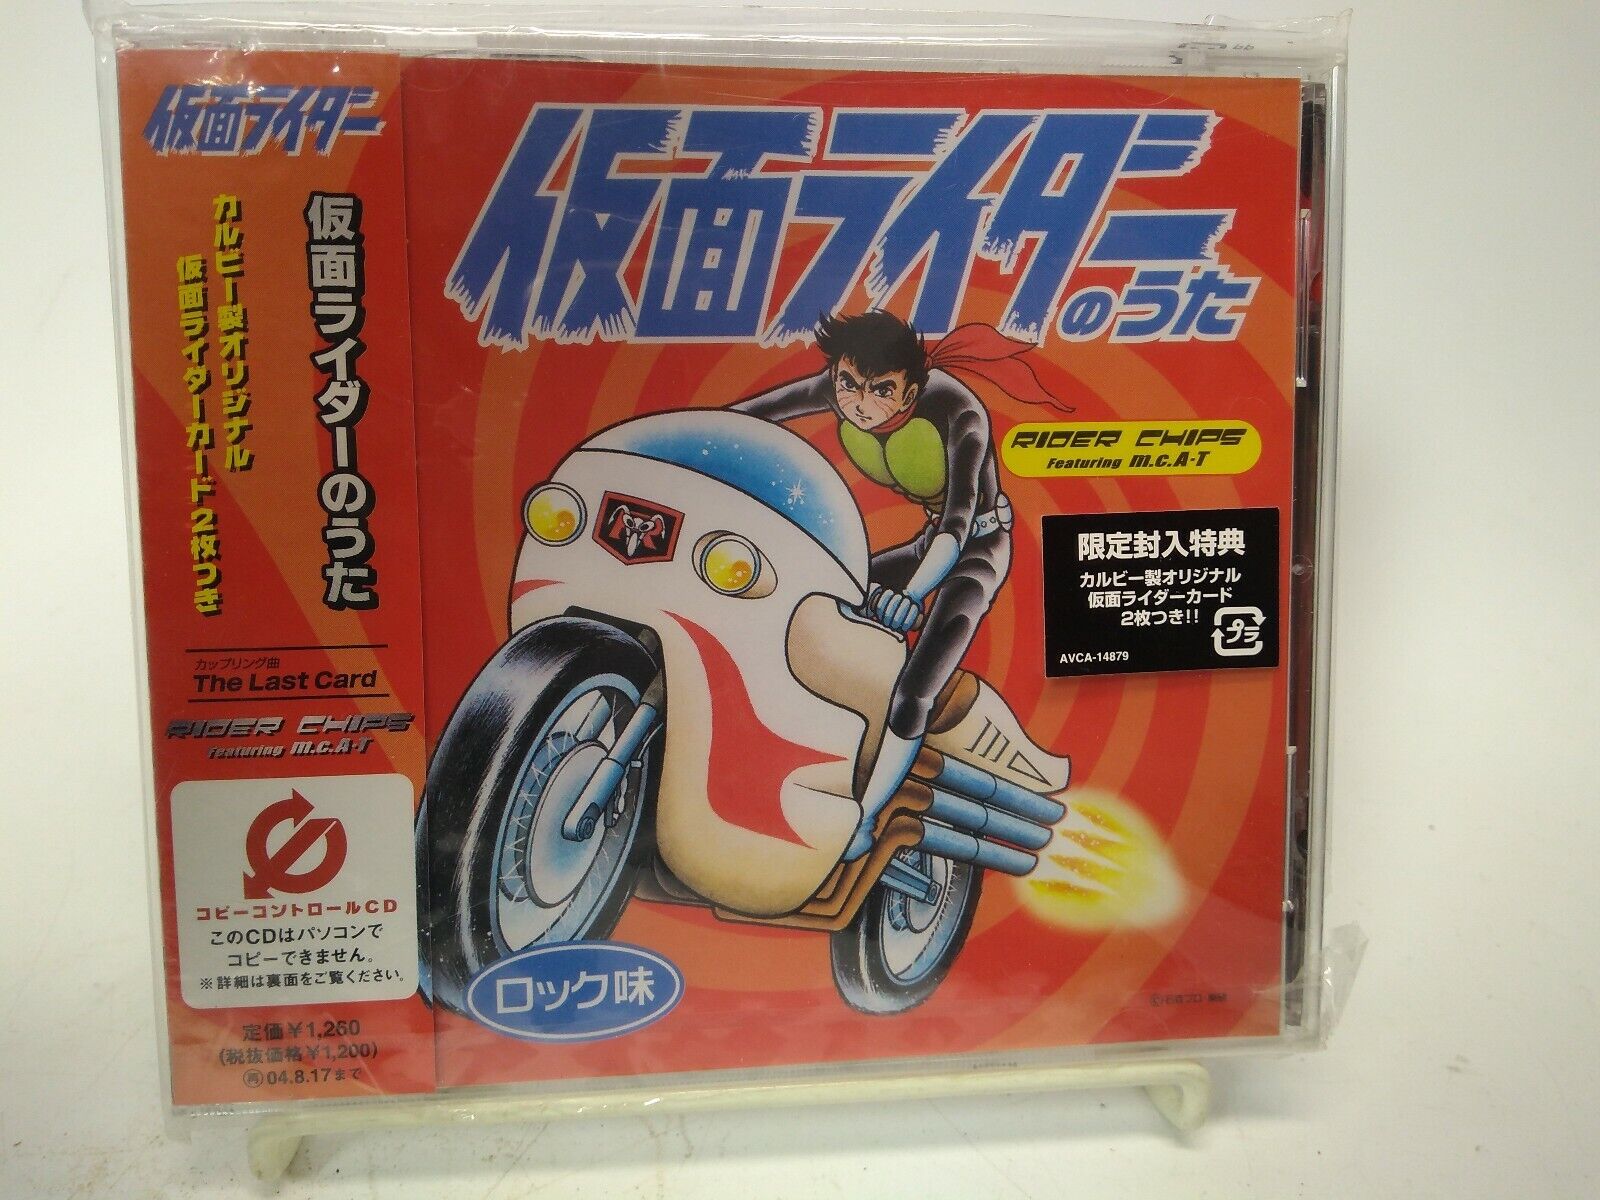 Kamen Rider with chip card CD Rider of the song CD Japan Music Japanese Anime 